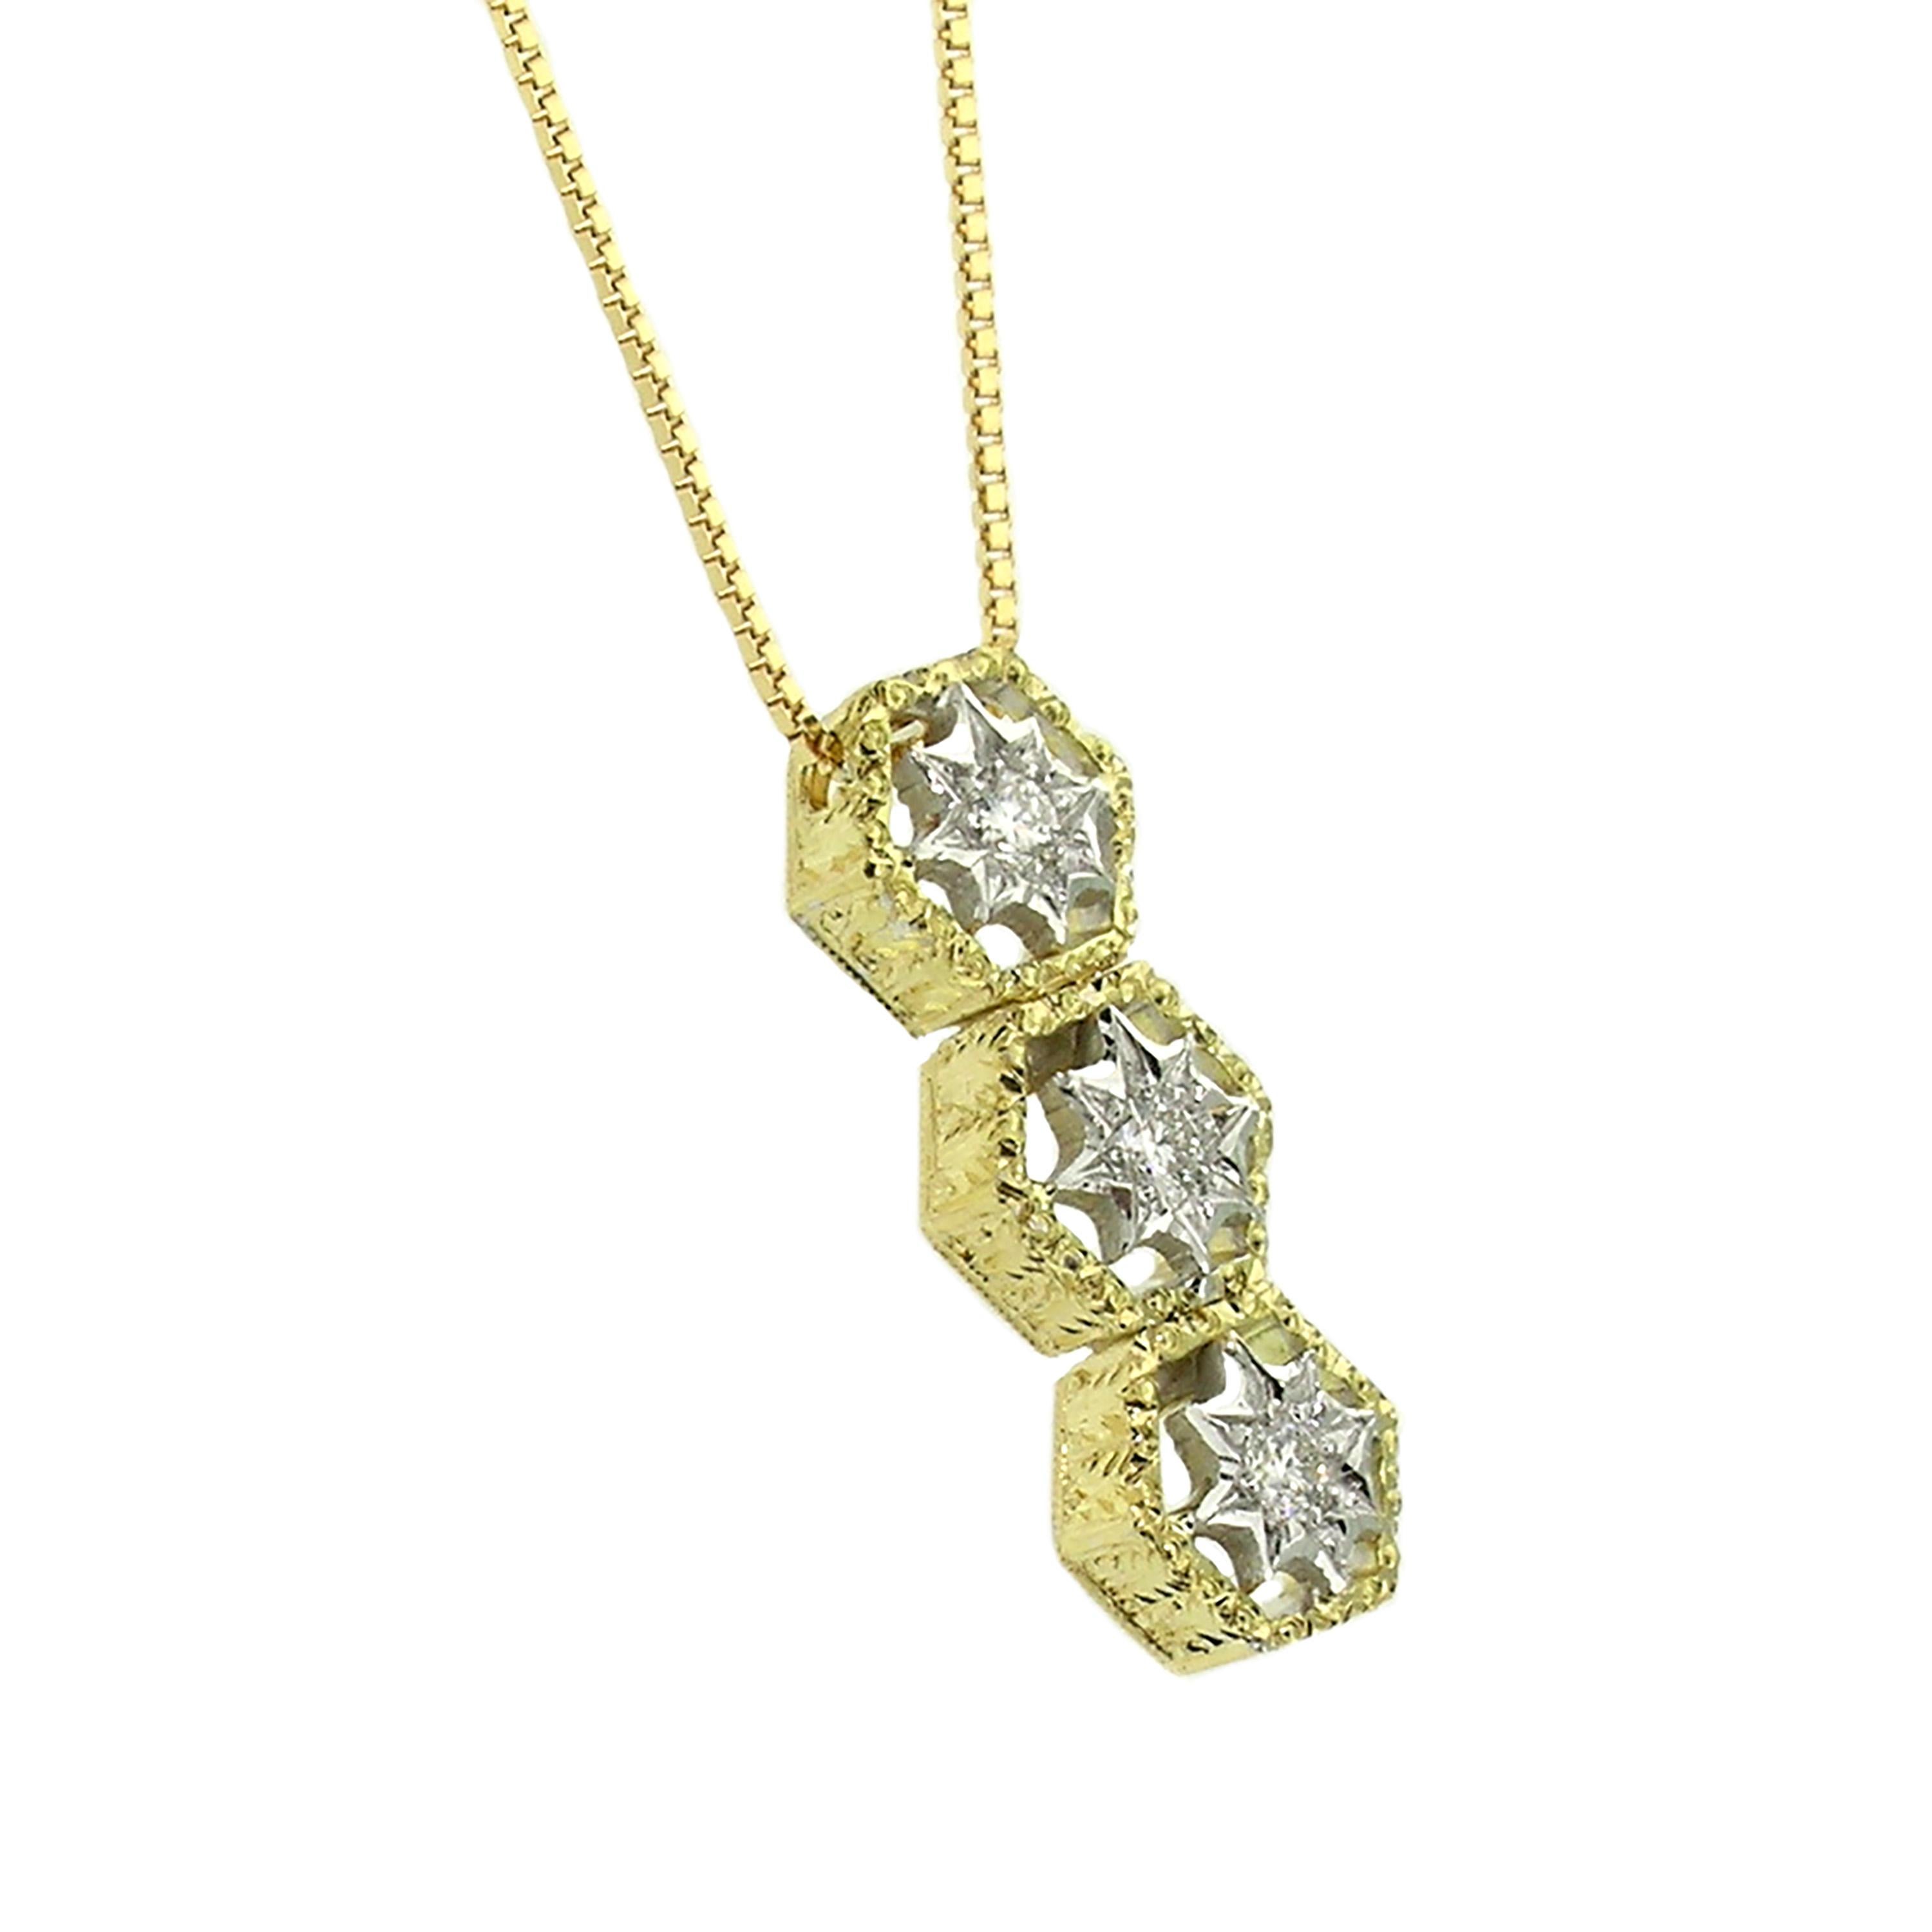 Round Cut 18kt Gold and Diamond Necklace, Hand Engraved and Handmade in Italy